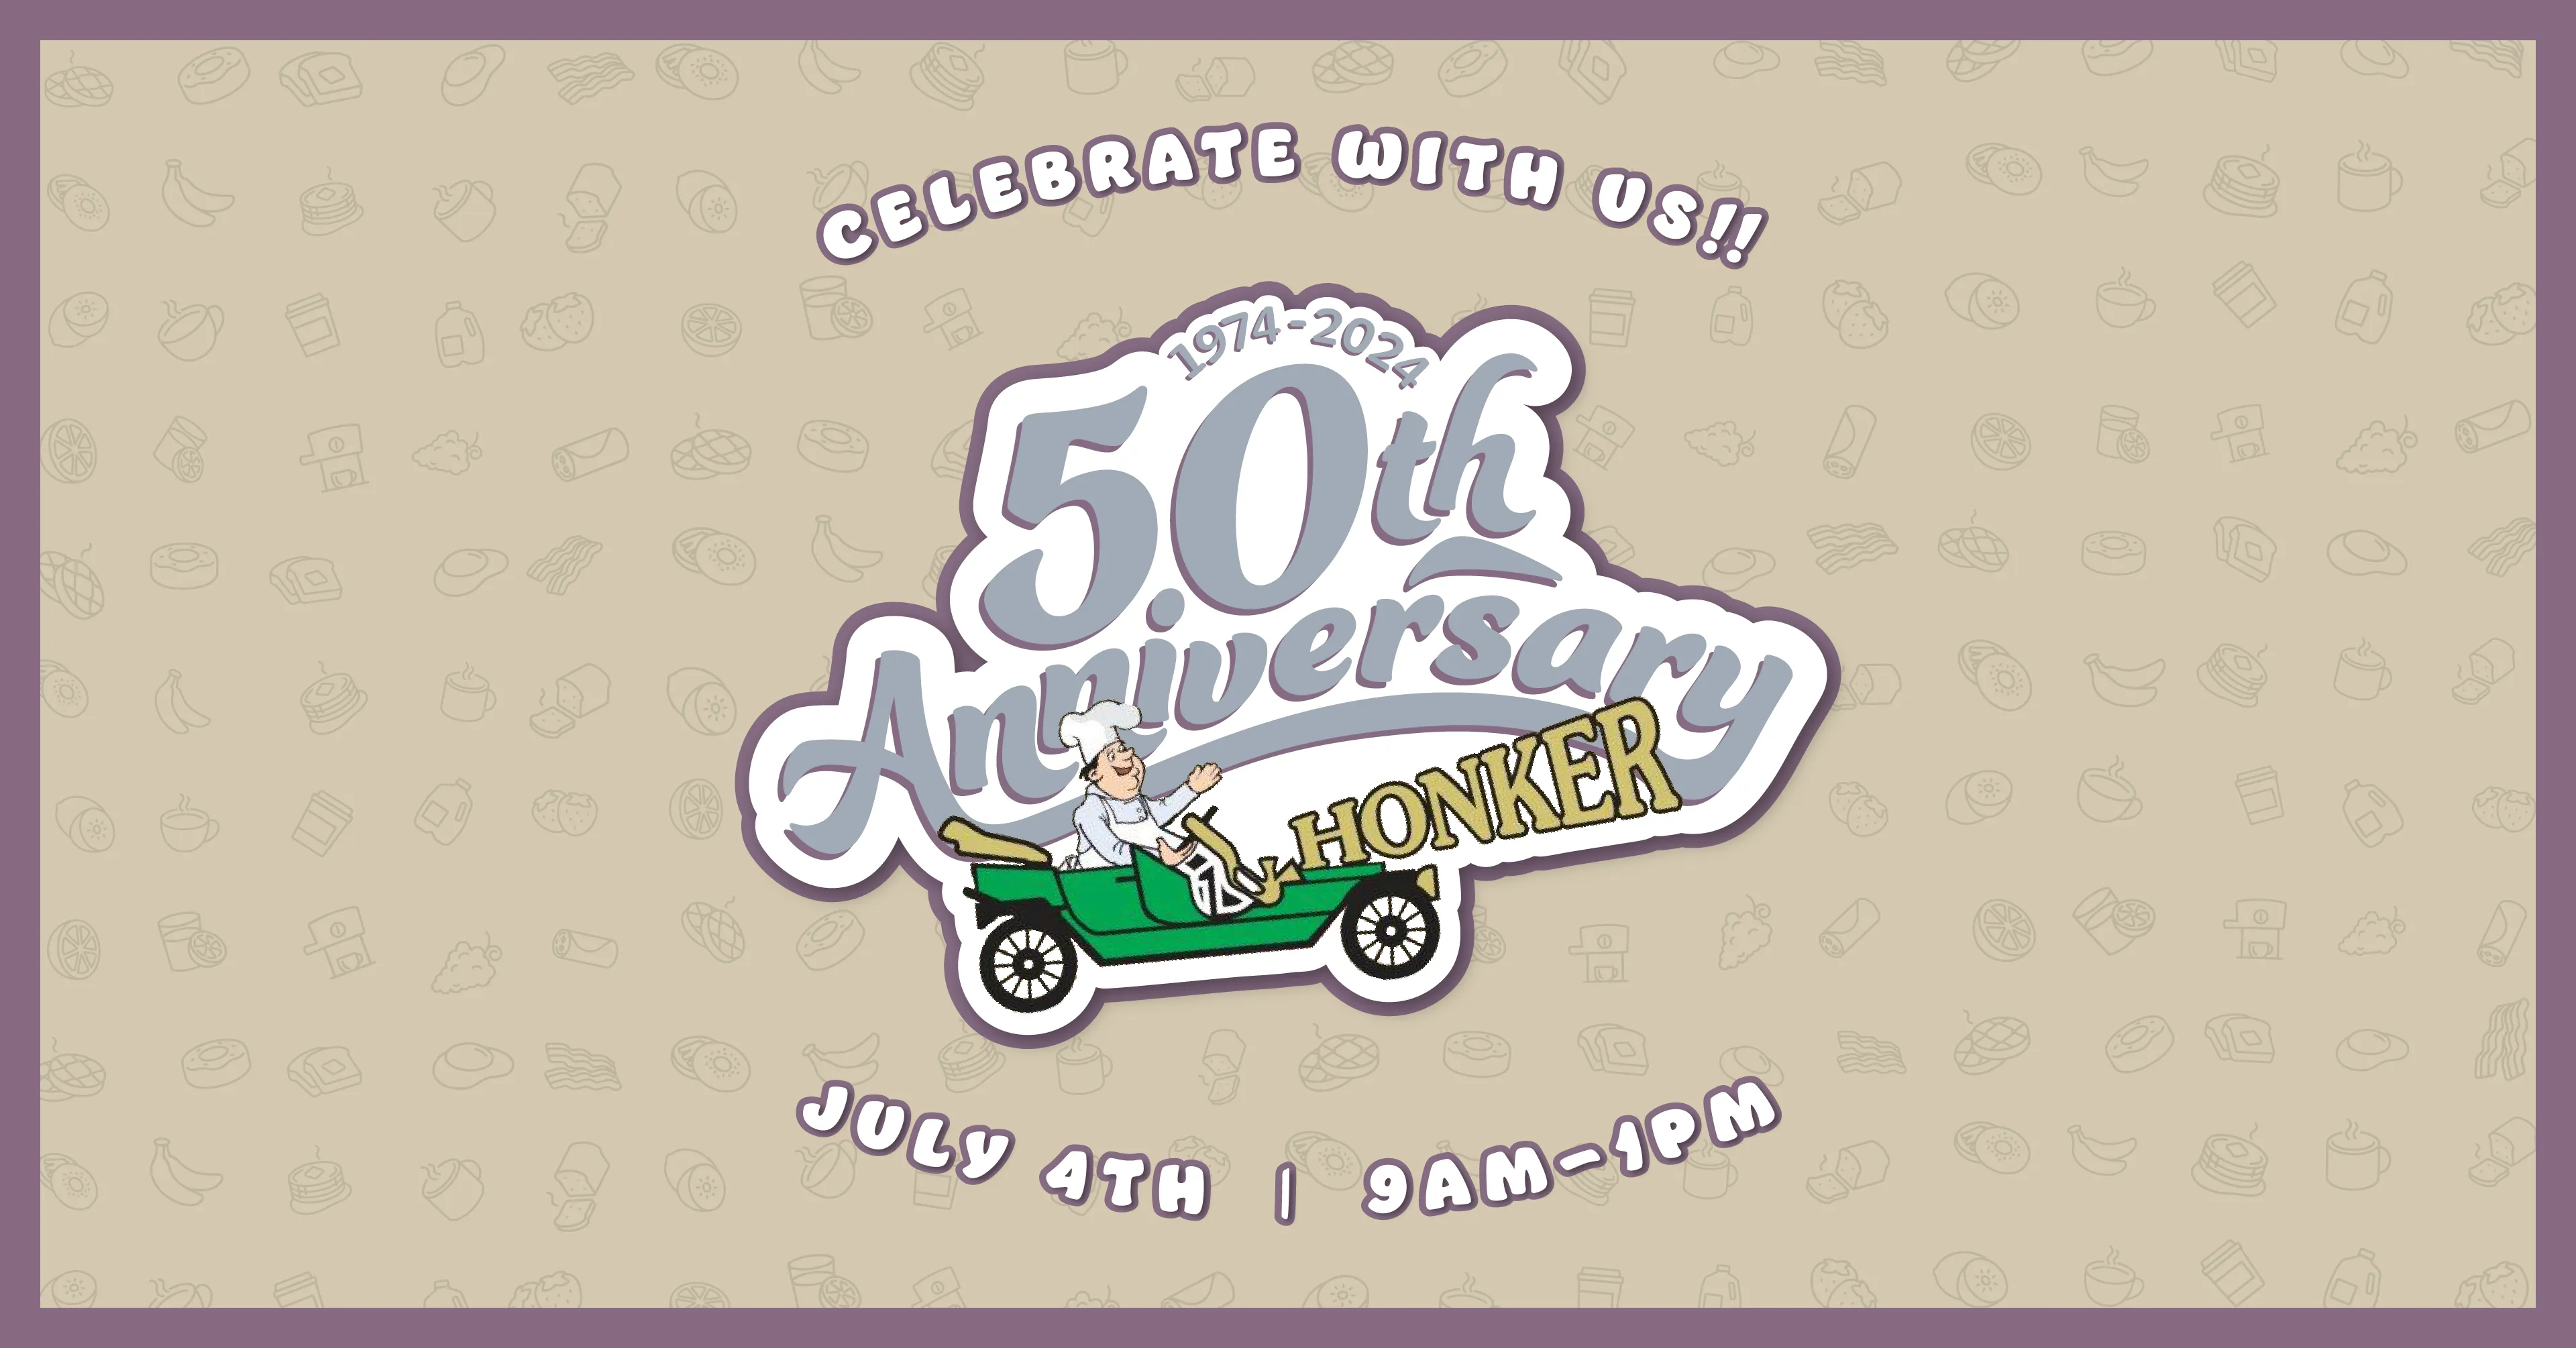 Celebrate with us our 50th Anniversary. This 4th of July - 9am - 1pm.